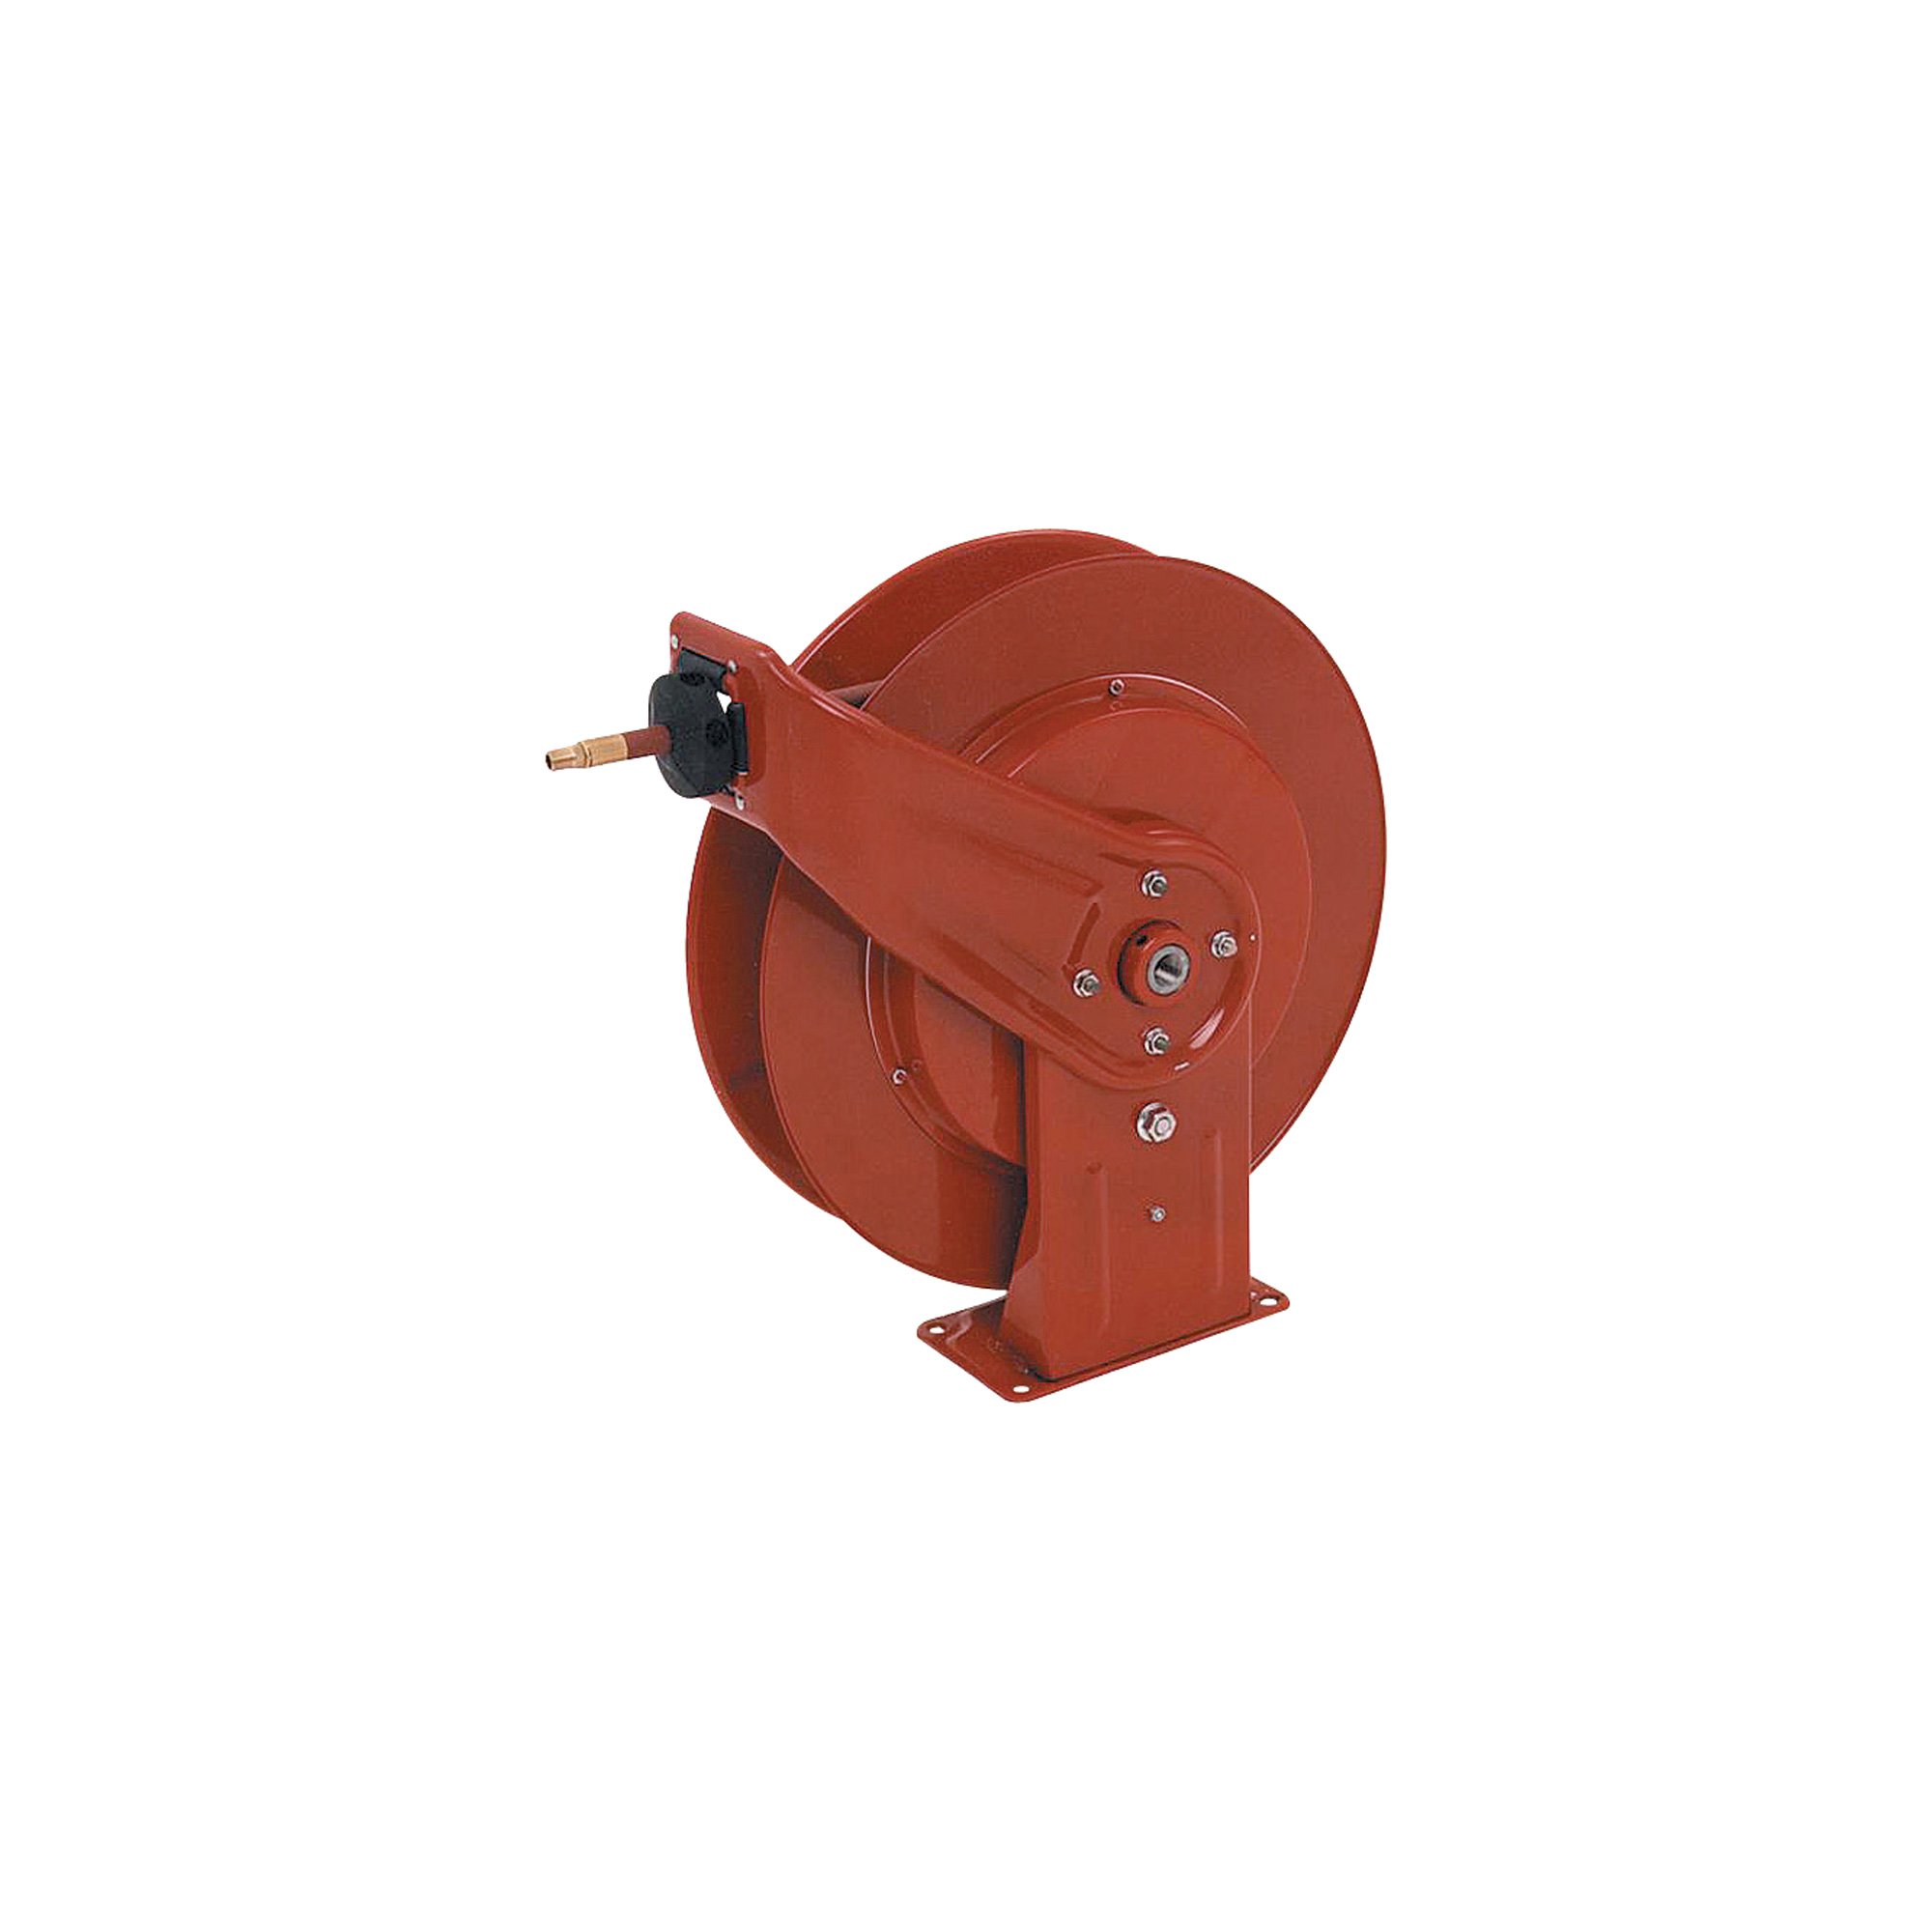 Reelcraft Air Hose Reel With Hose — 3/8in. x 75ft. Hose, Max. 300